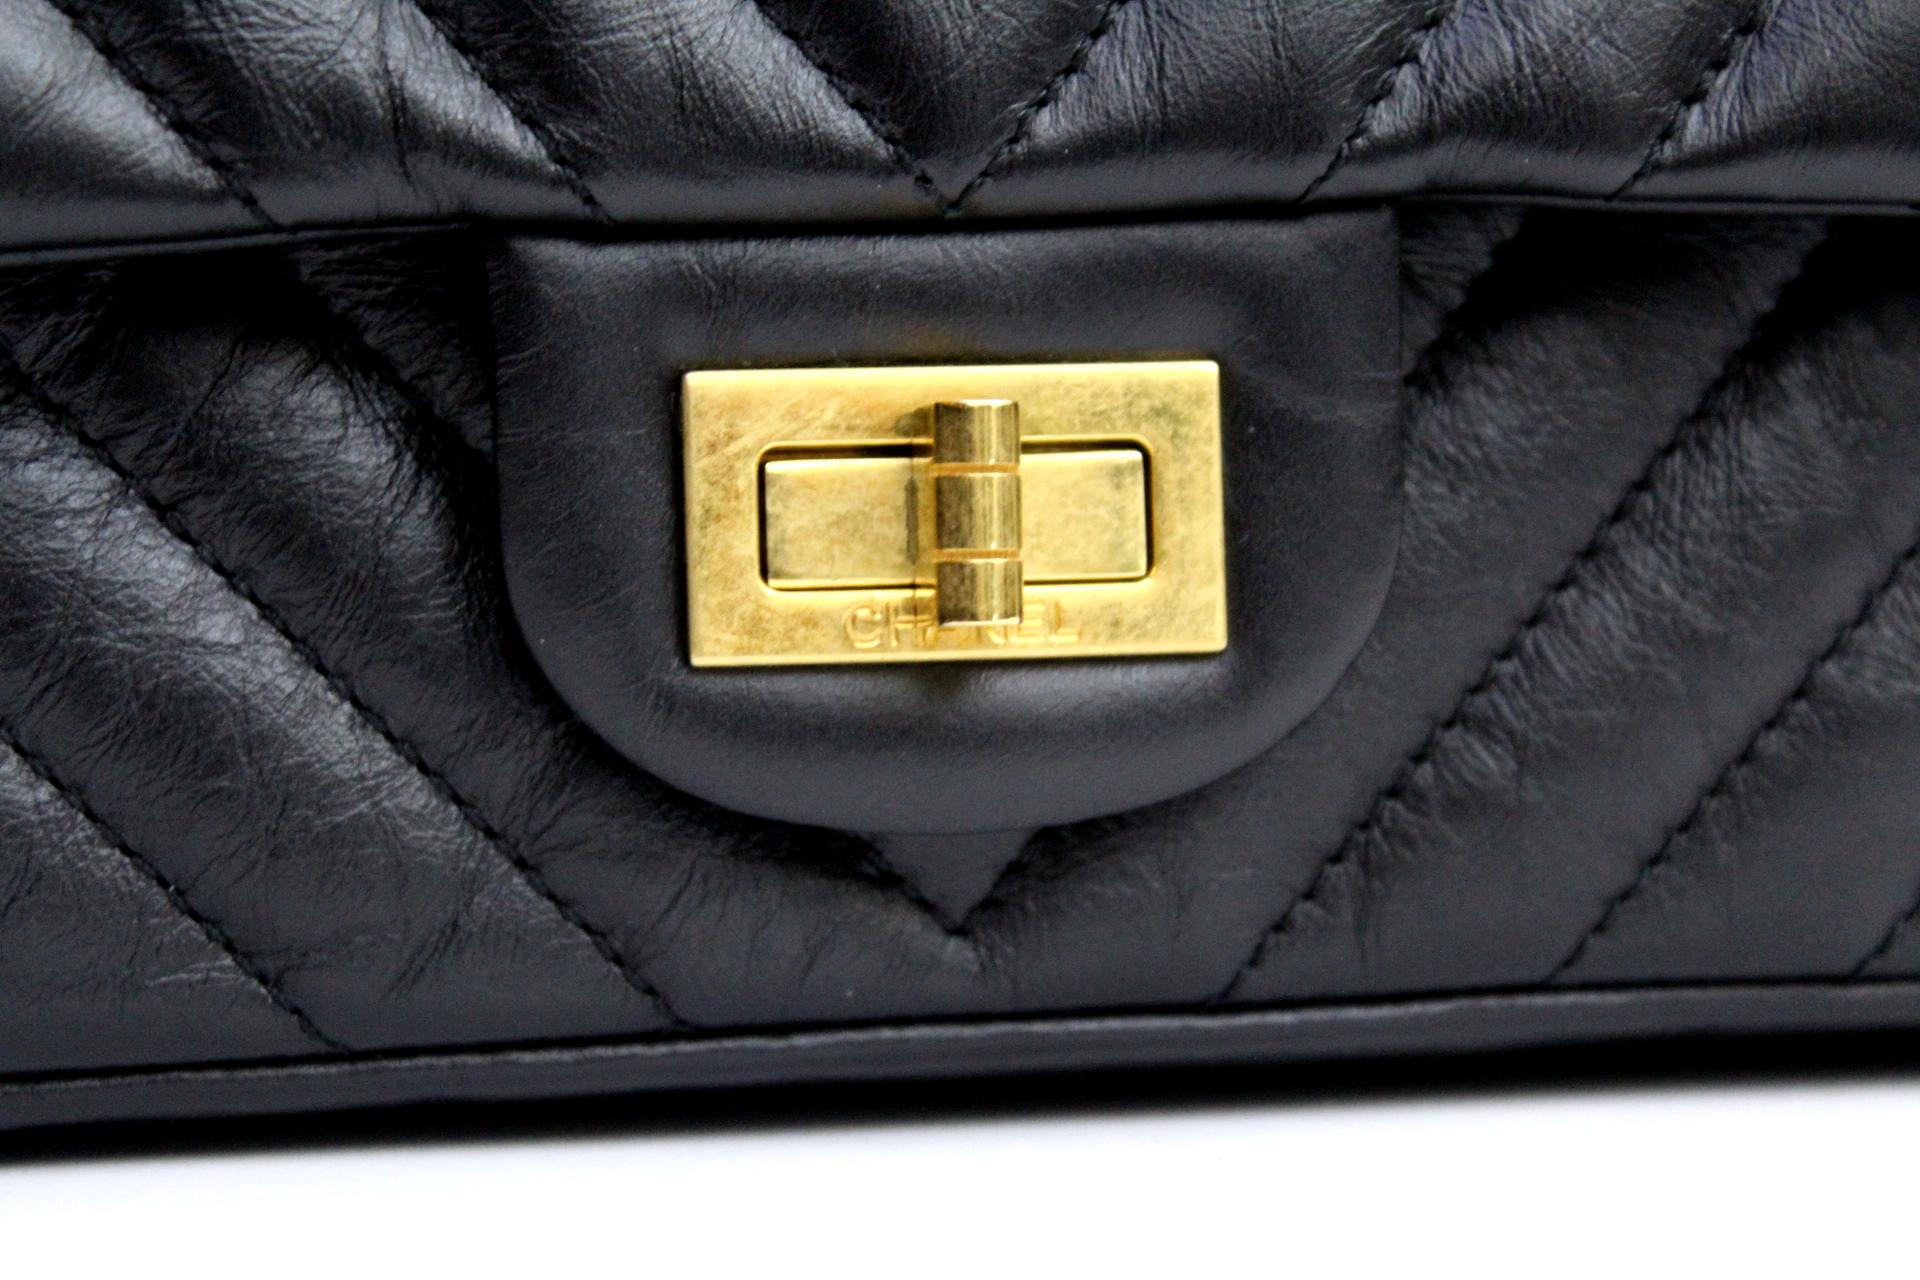 Fantastic bag of Chanel model 2.55 small size, made of black lambskin.

The bag features a chevron pattern with gold hardware. Hook closure.

VERY GOOD CONDITION.